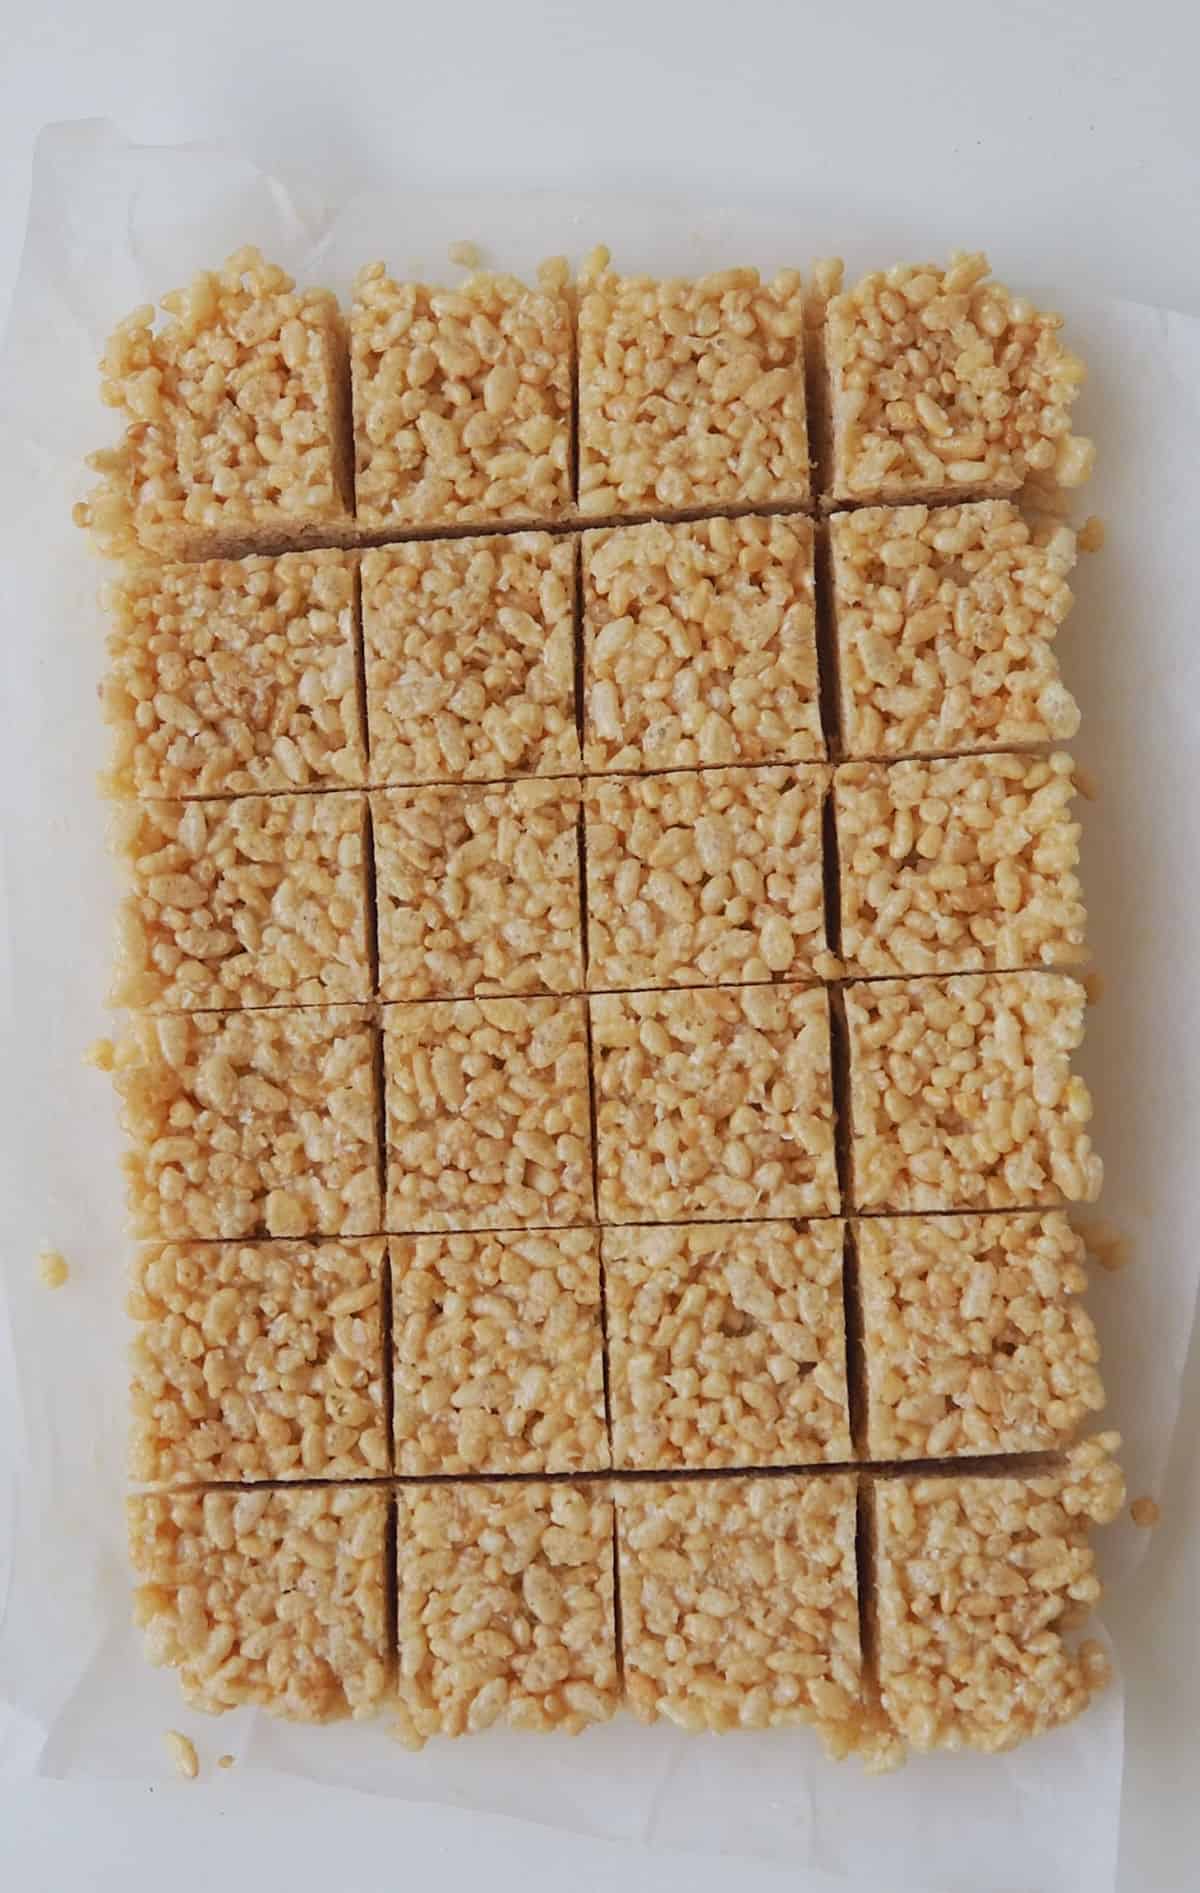 Overhead view of rice bubble slice sitting on a sheet of baking paper and cut into pieces.